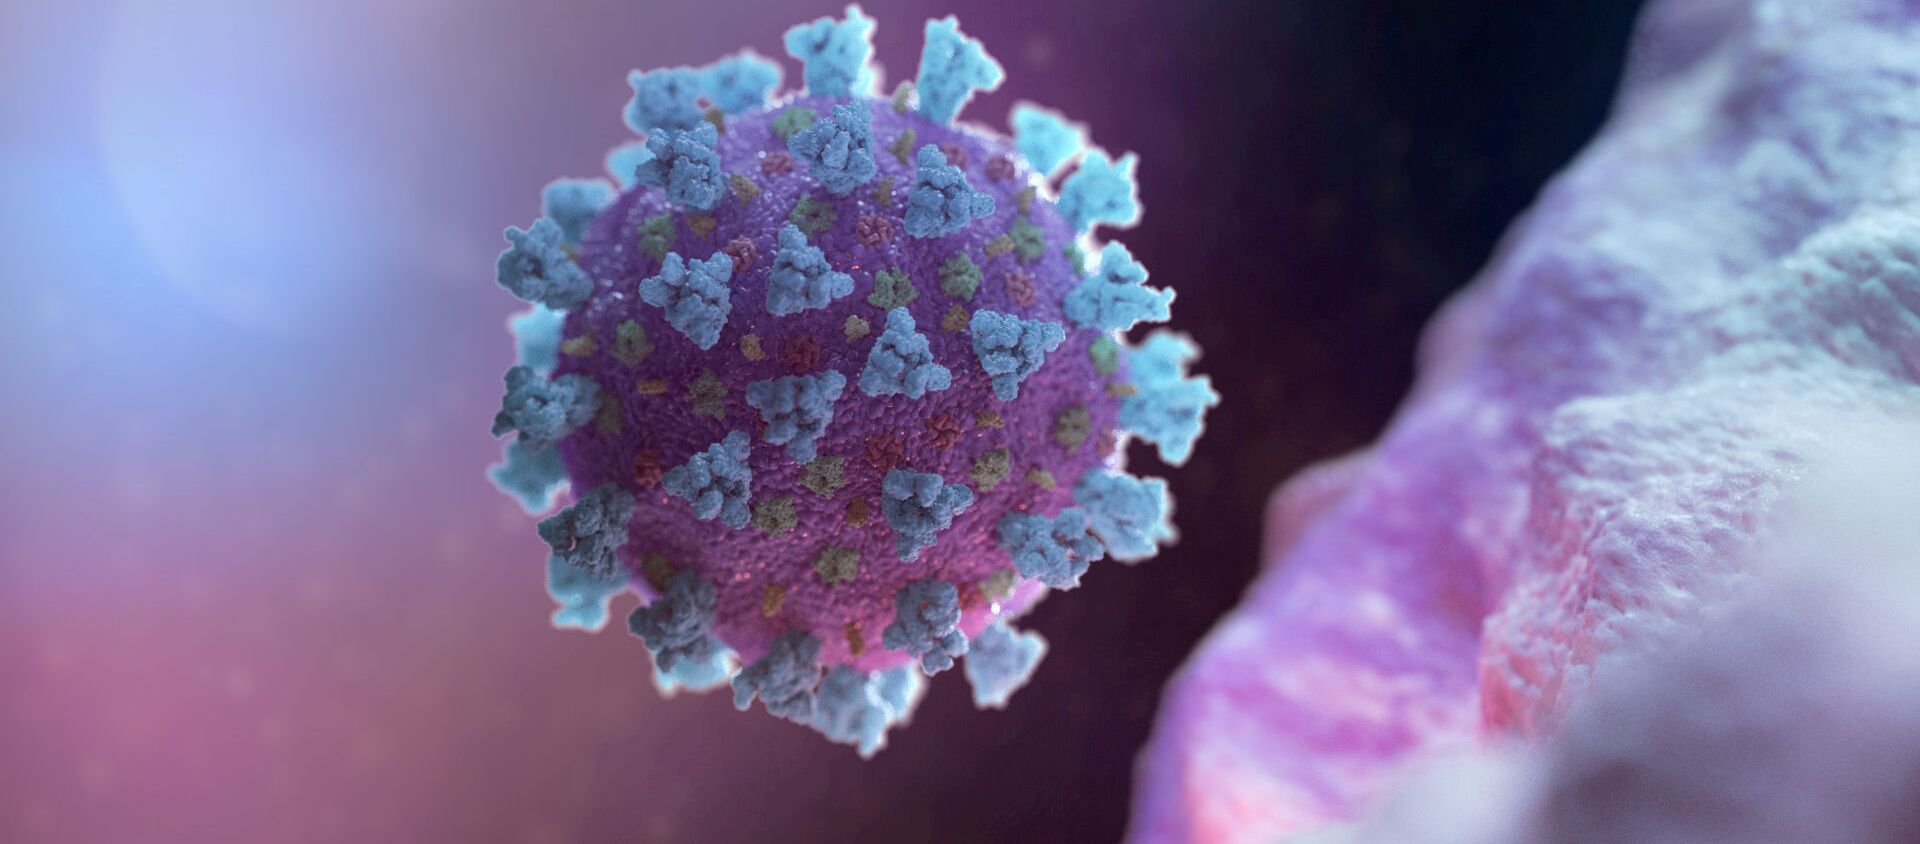 FILE PHOTO: A computer image created by Nexu Science Communication together with Trinity College in Dublin, shows a model structurally representative of a betacoronavirus which is the type of virus linked to COVID-19, better known as the coronavirus linked to the Wuhan outbreak, shared with Reuters on February 18, 2020 - Sputnik International, 1920, 09.02.2021